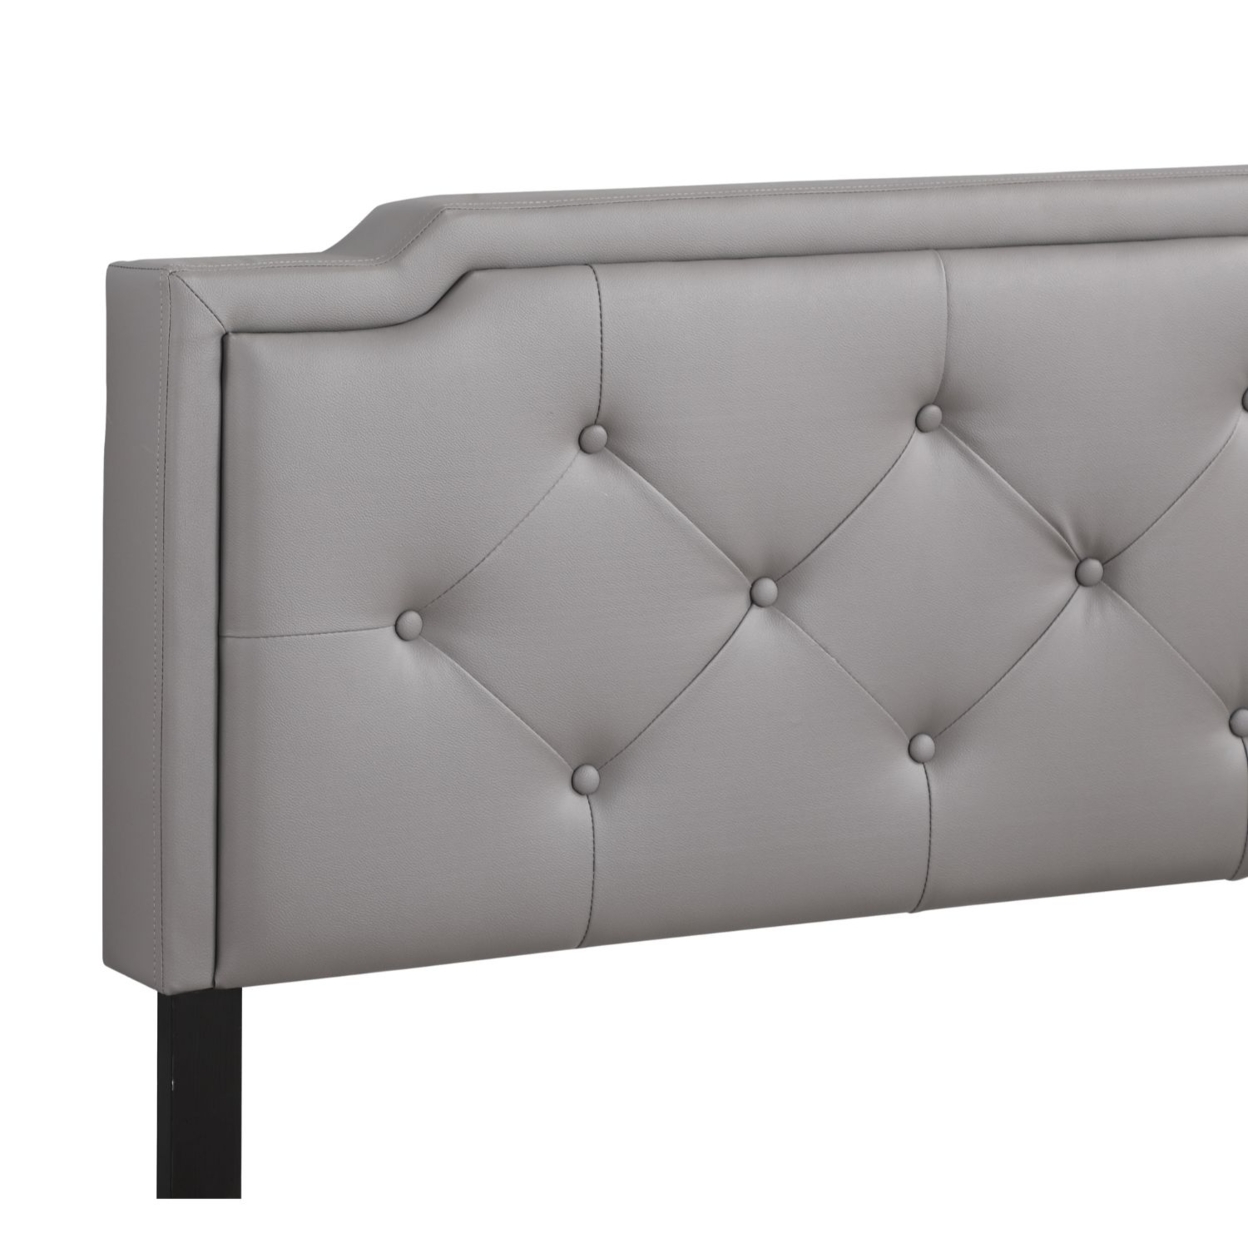 Home Furnitue Deb Light Grey Full Adjustable Panel Bed - image 4 of 5